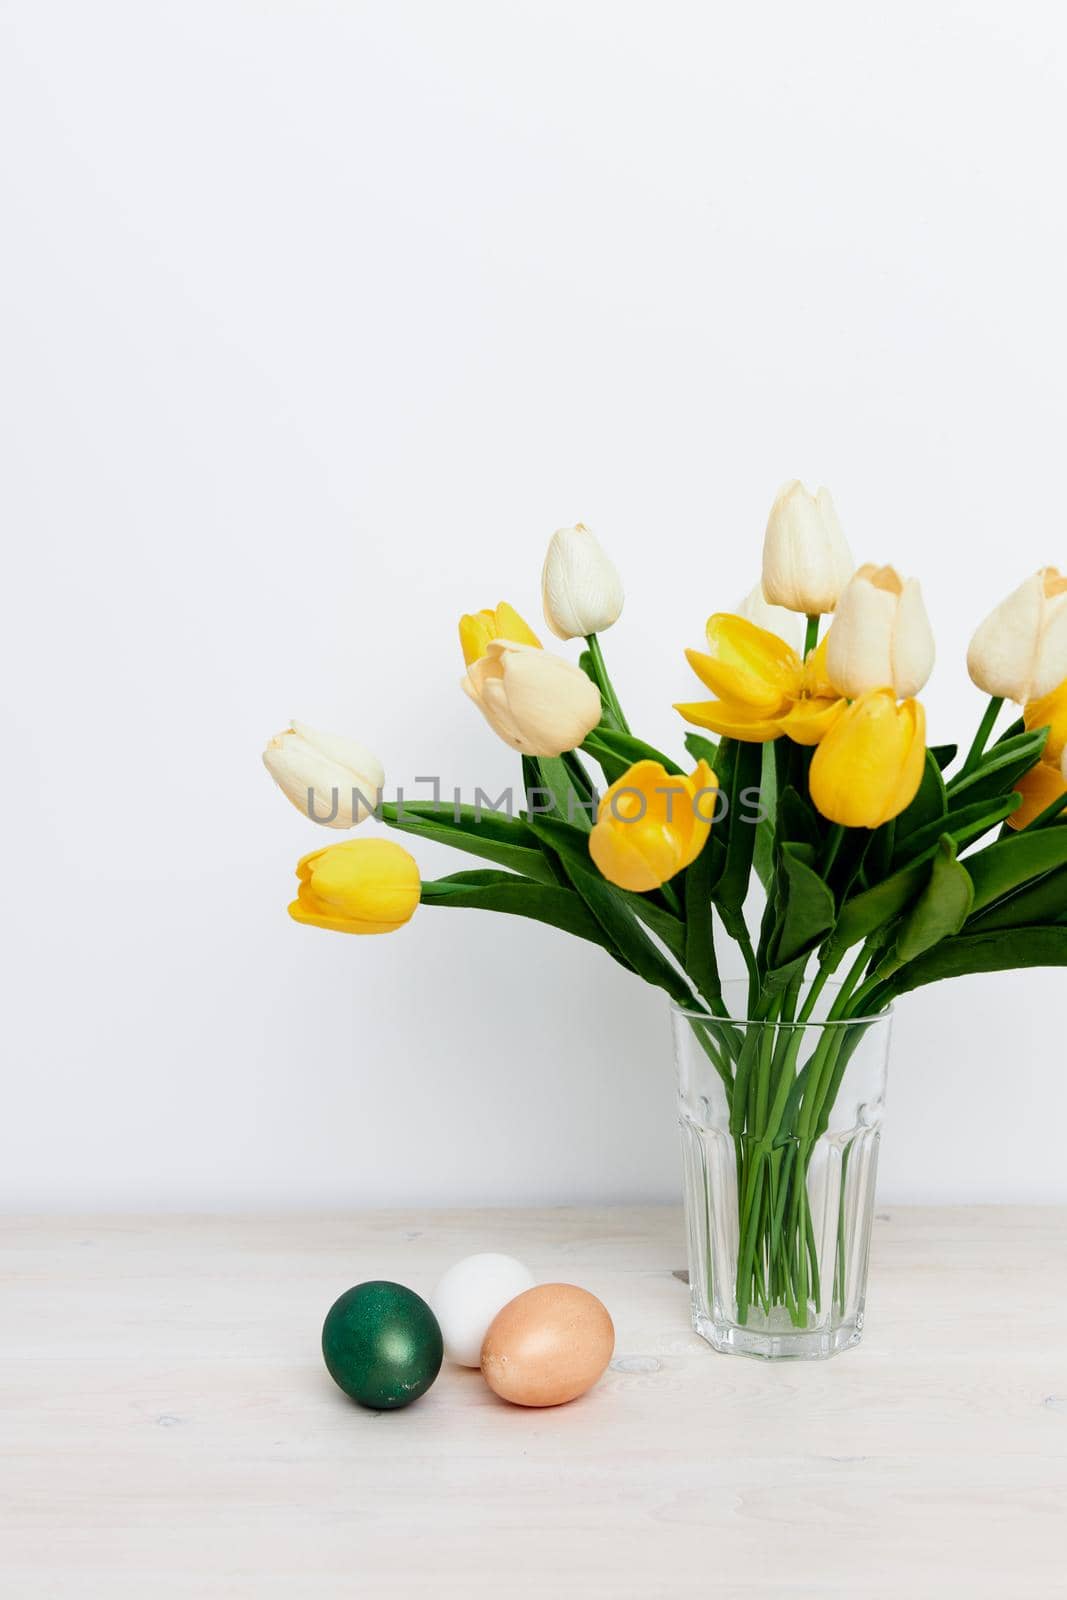 Easter holiday church traditions colorful eggs and yellow tulips by SHOTPRIME